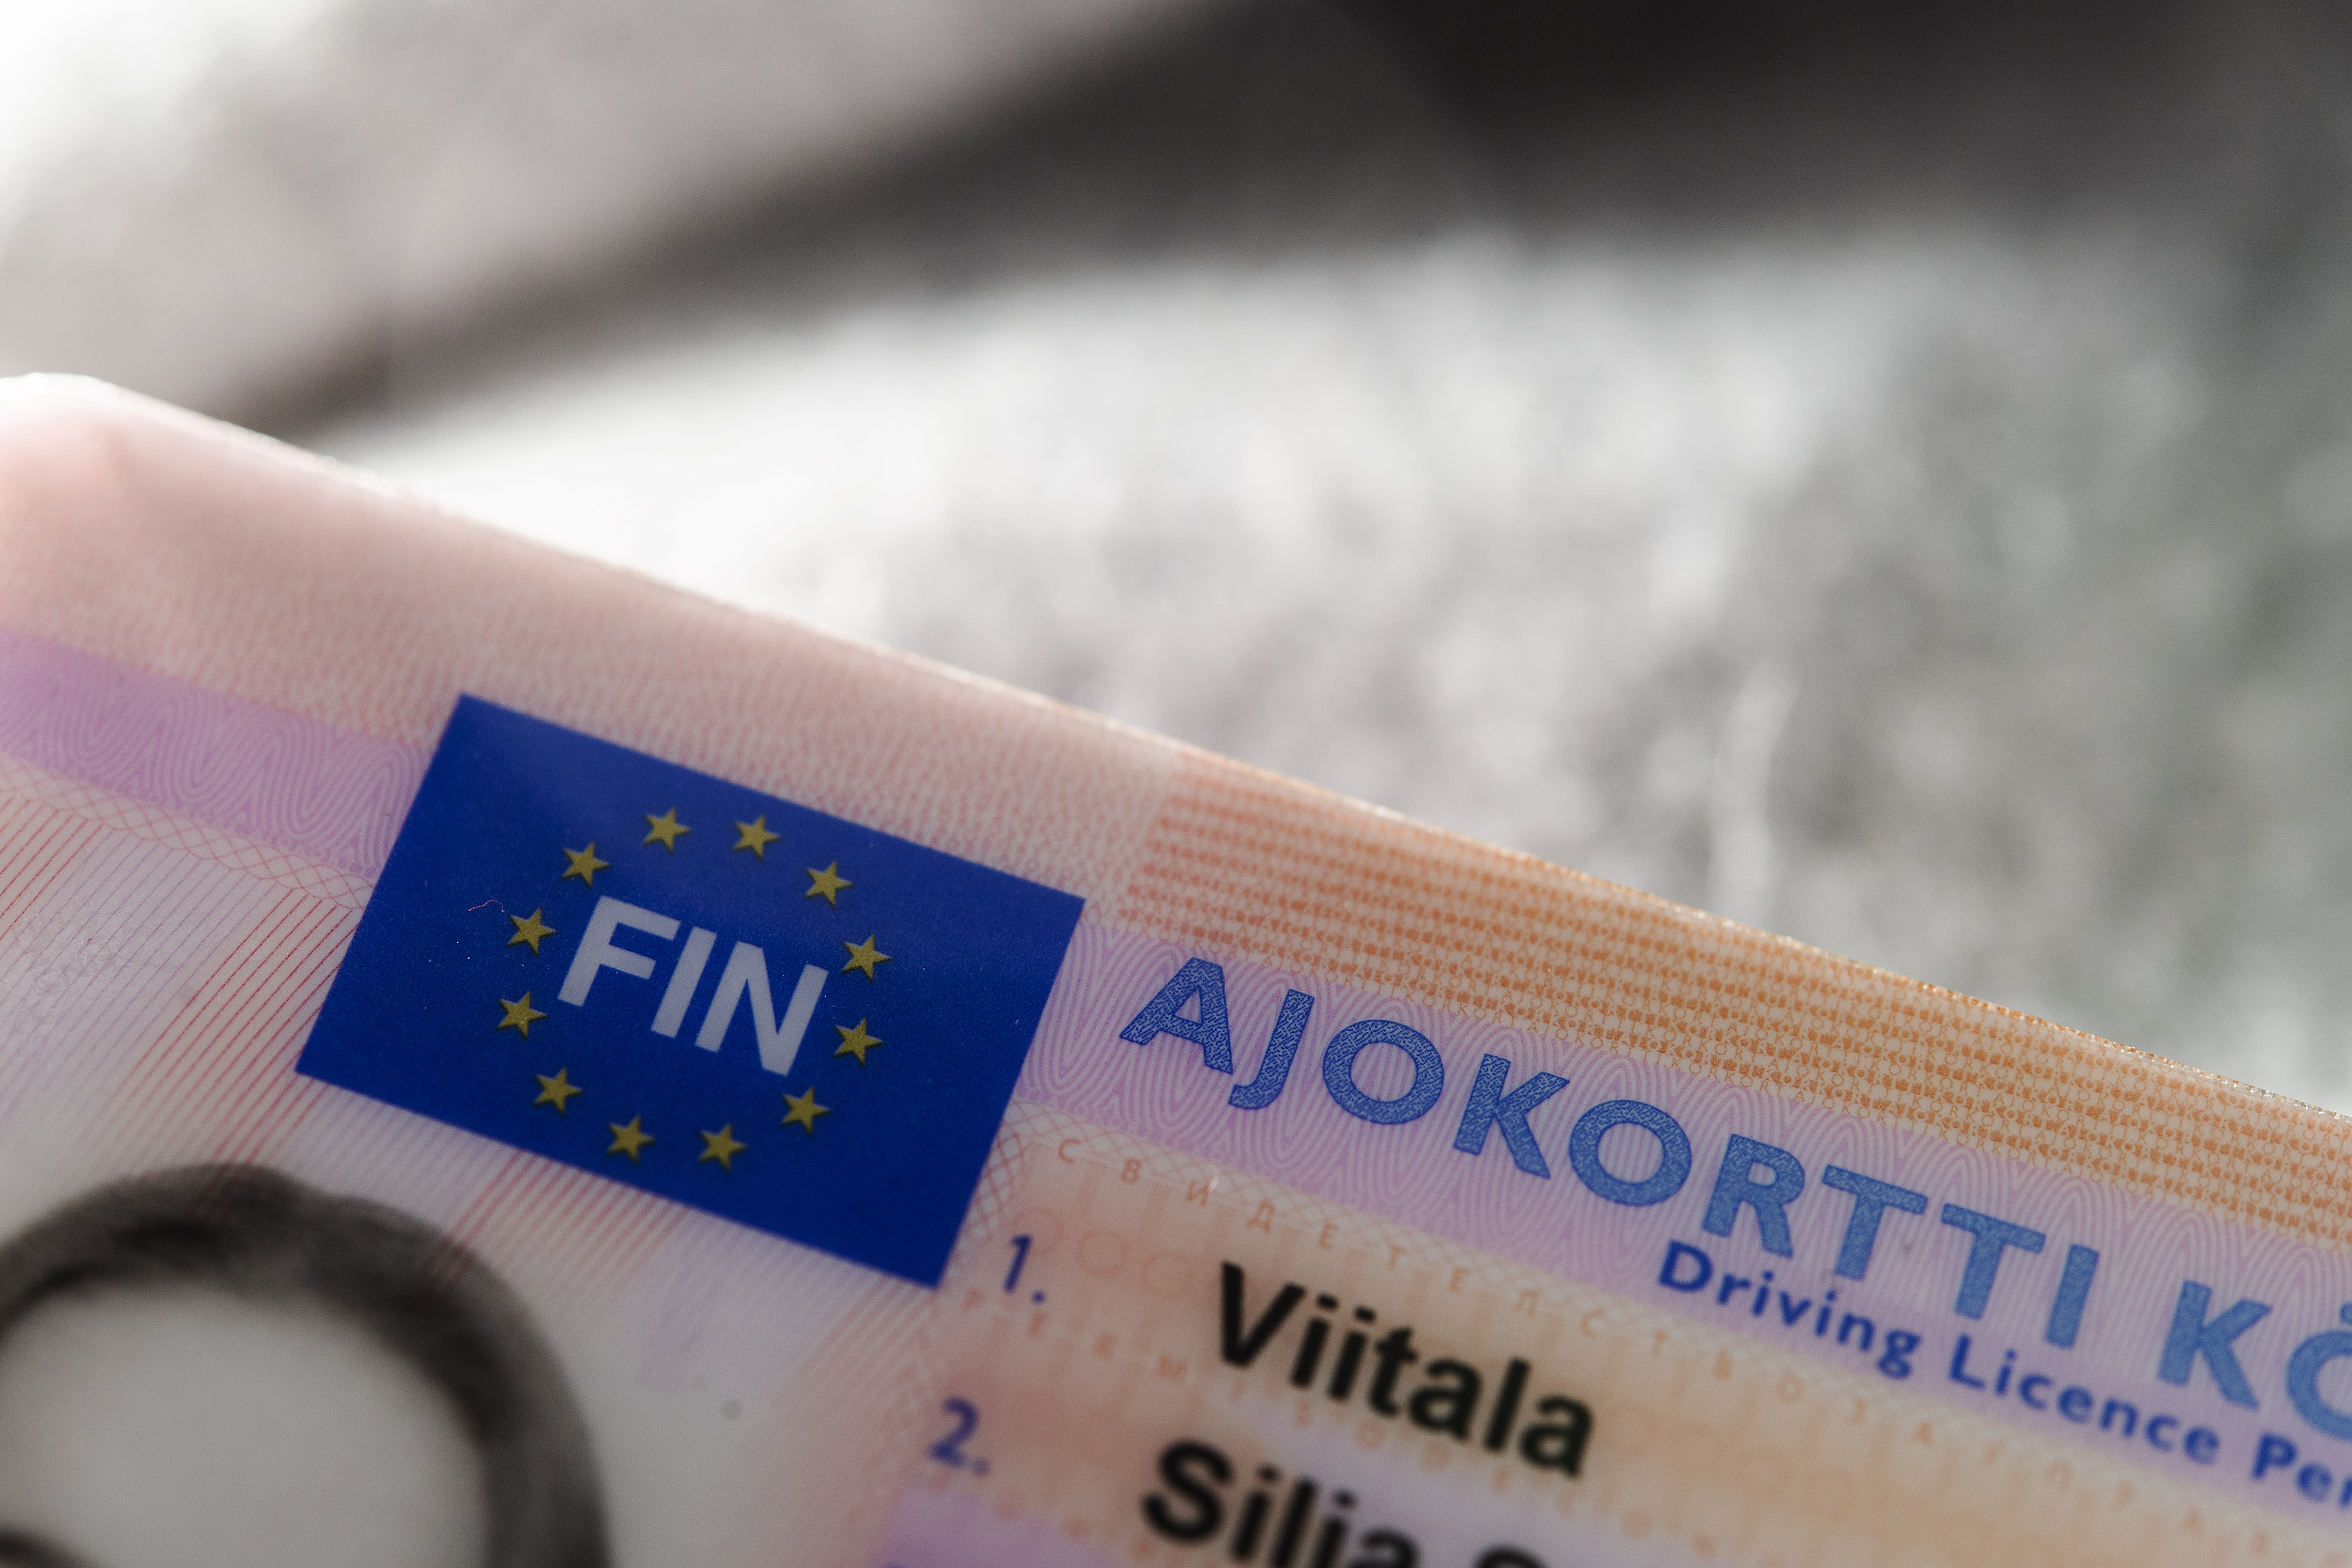 In Finland, 17-year-olds will soon be able to obtain a driving license